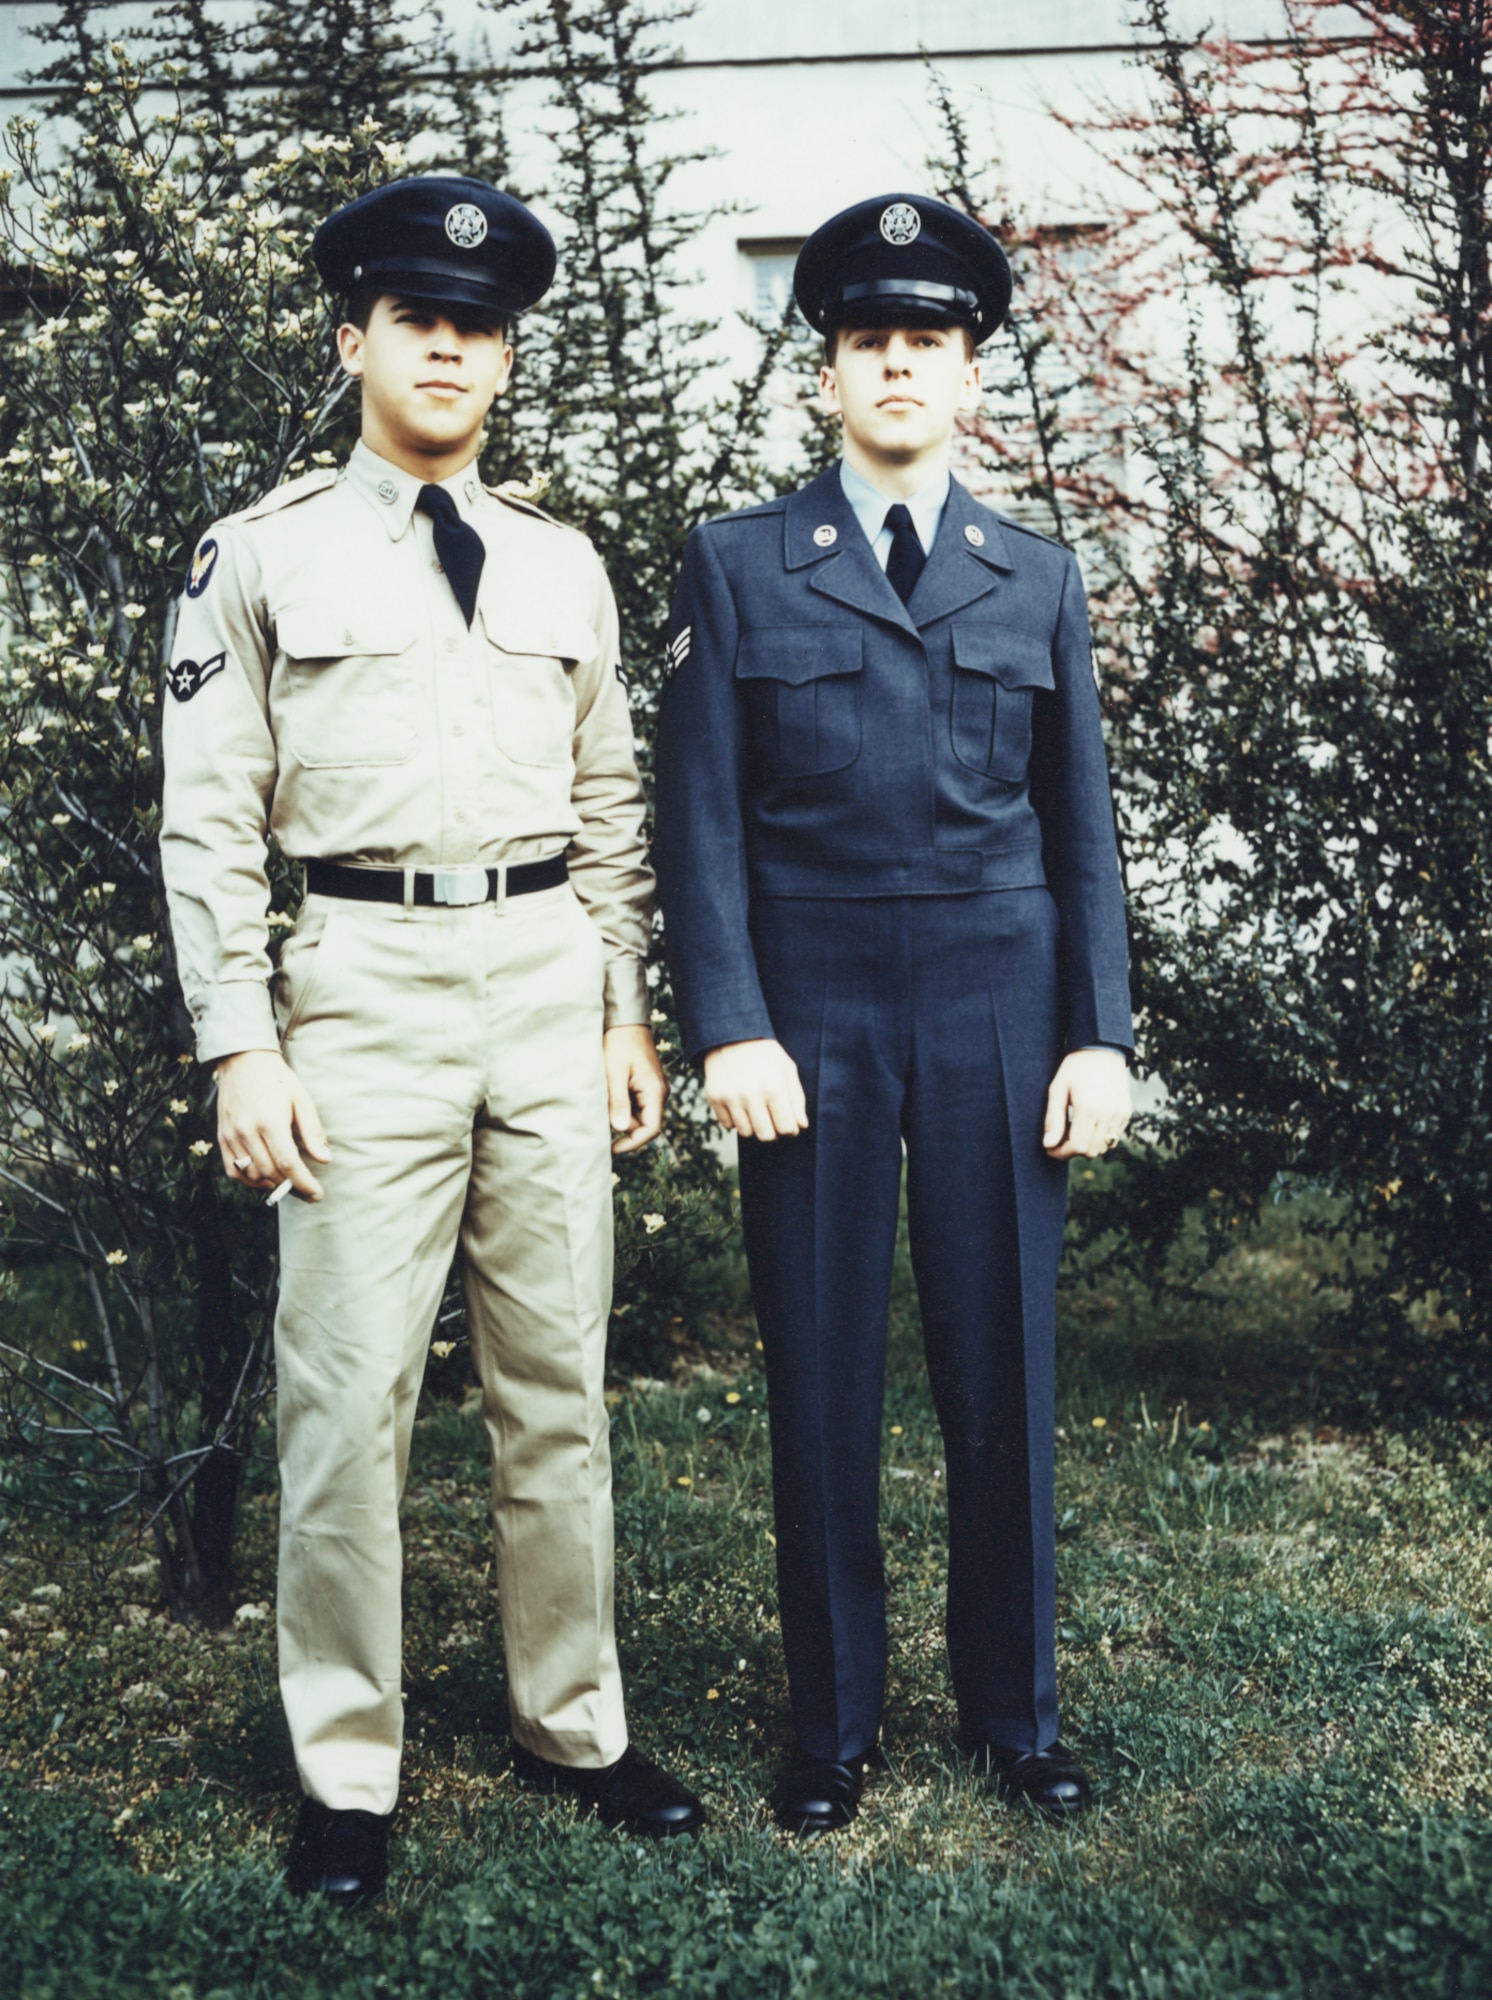 First uniforms for the new U. S. Air Force--early 1950's.